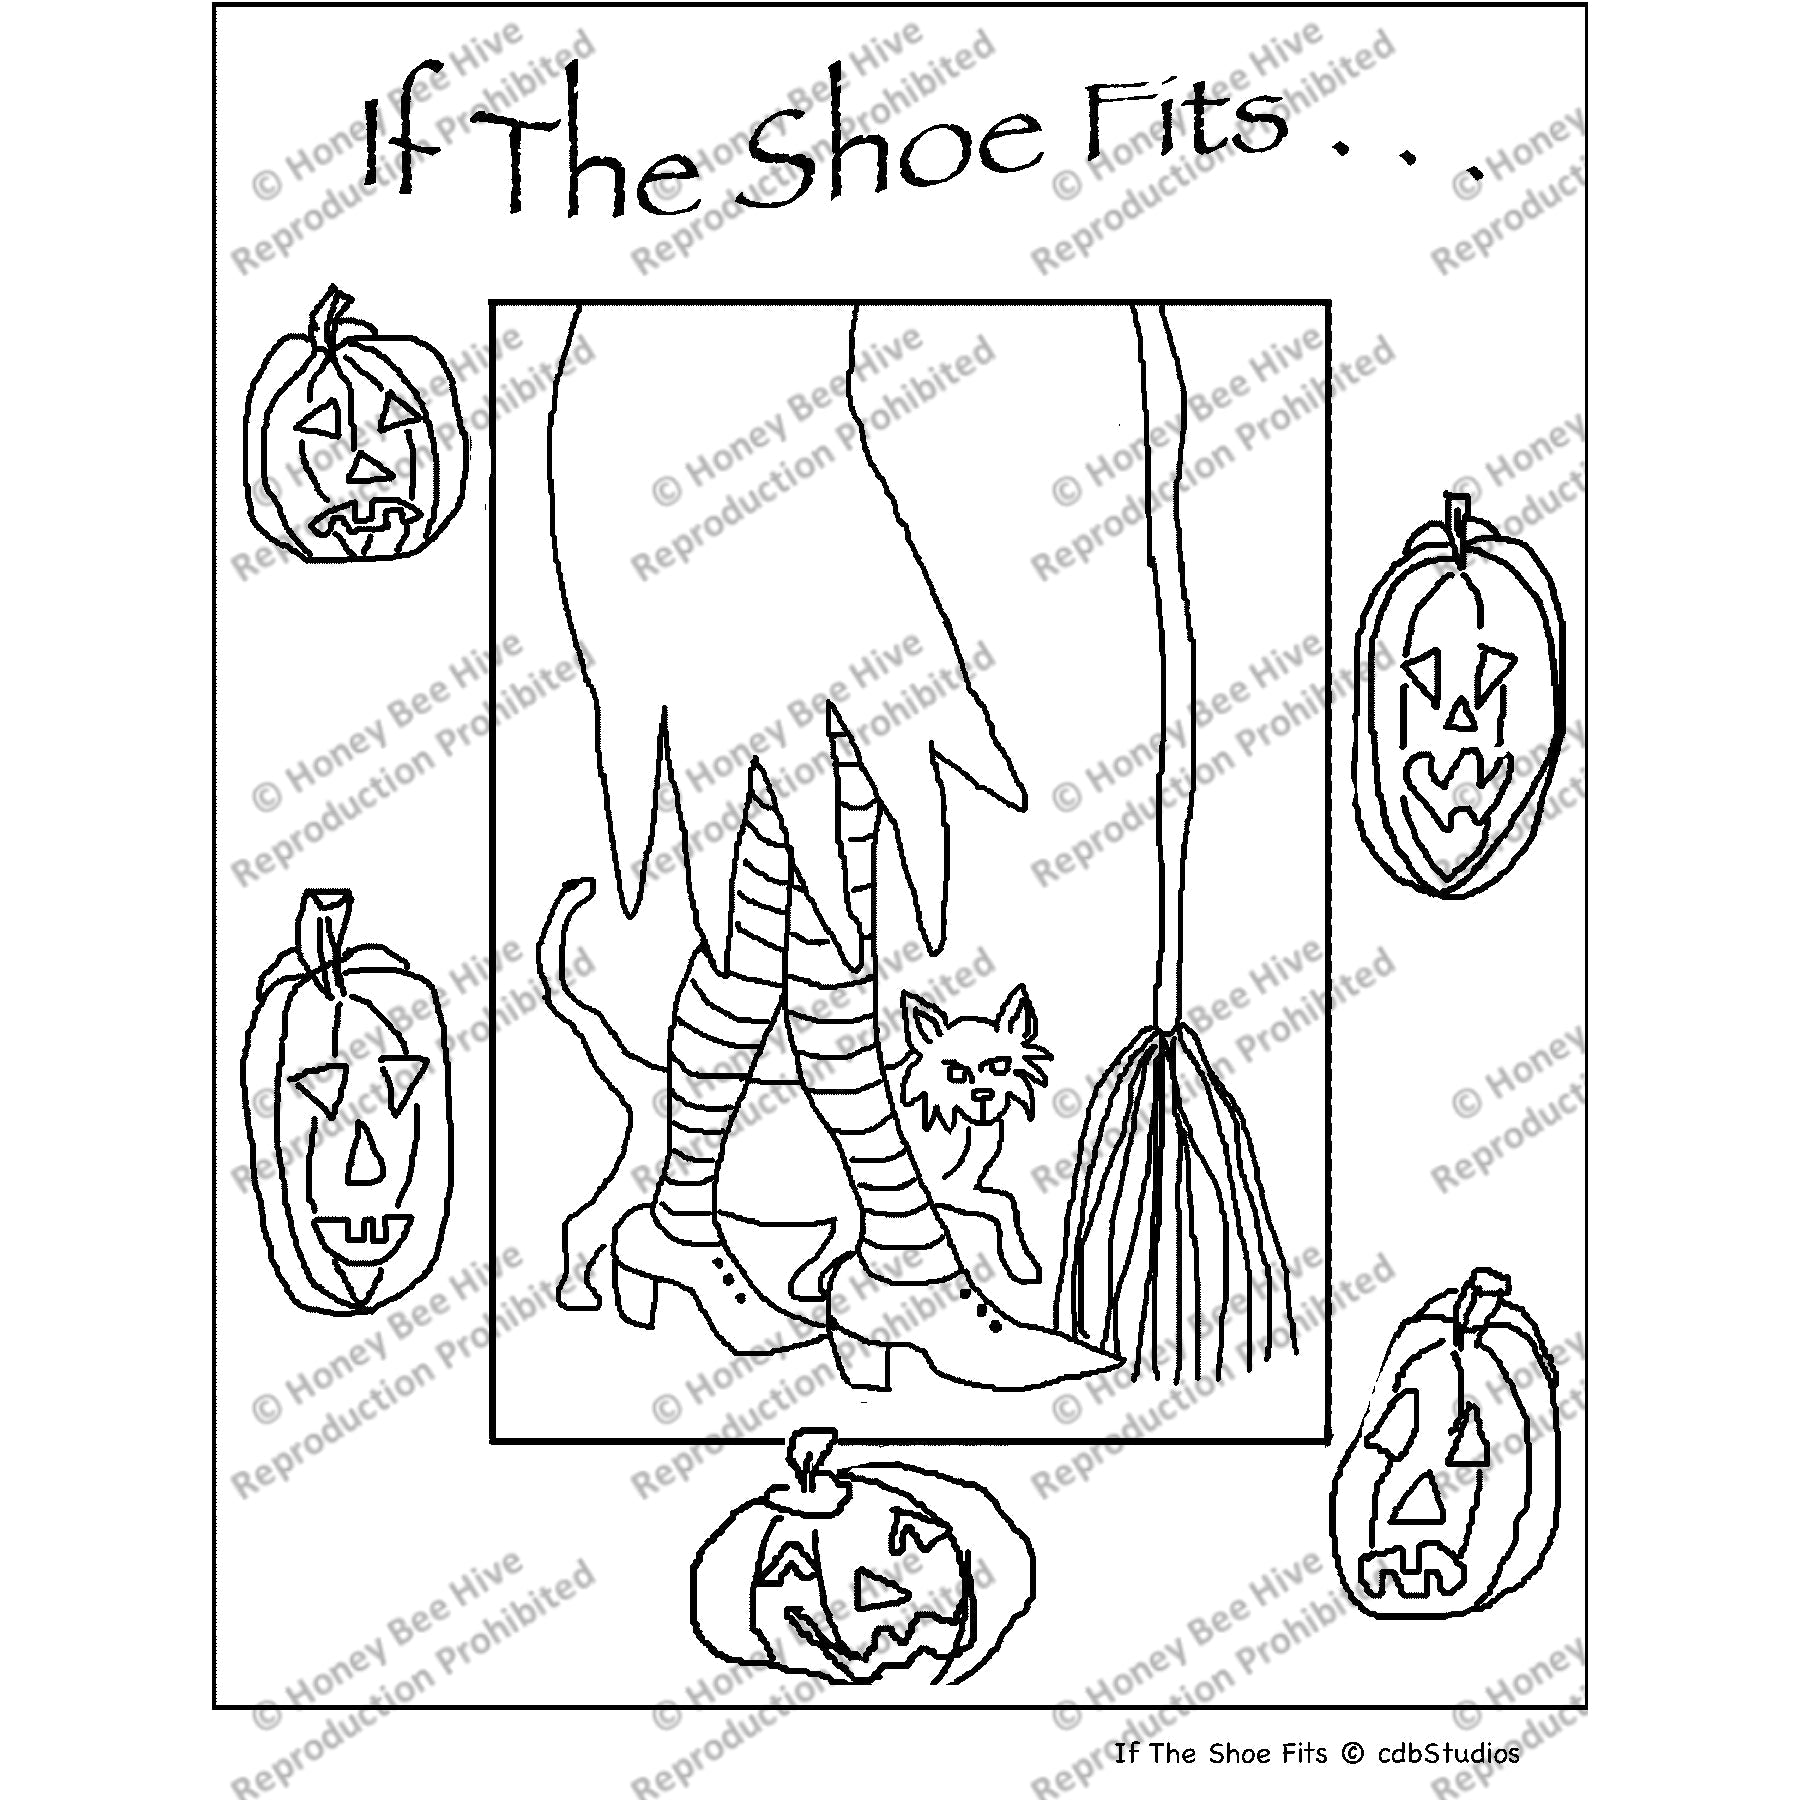 If the Shoe Fits, rug hooking pattern